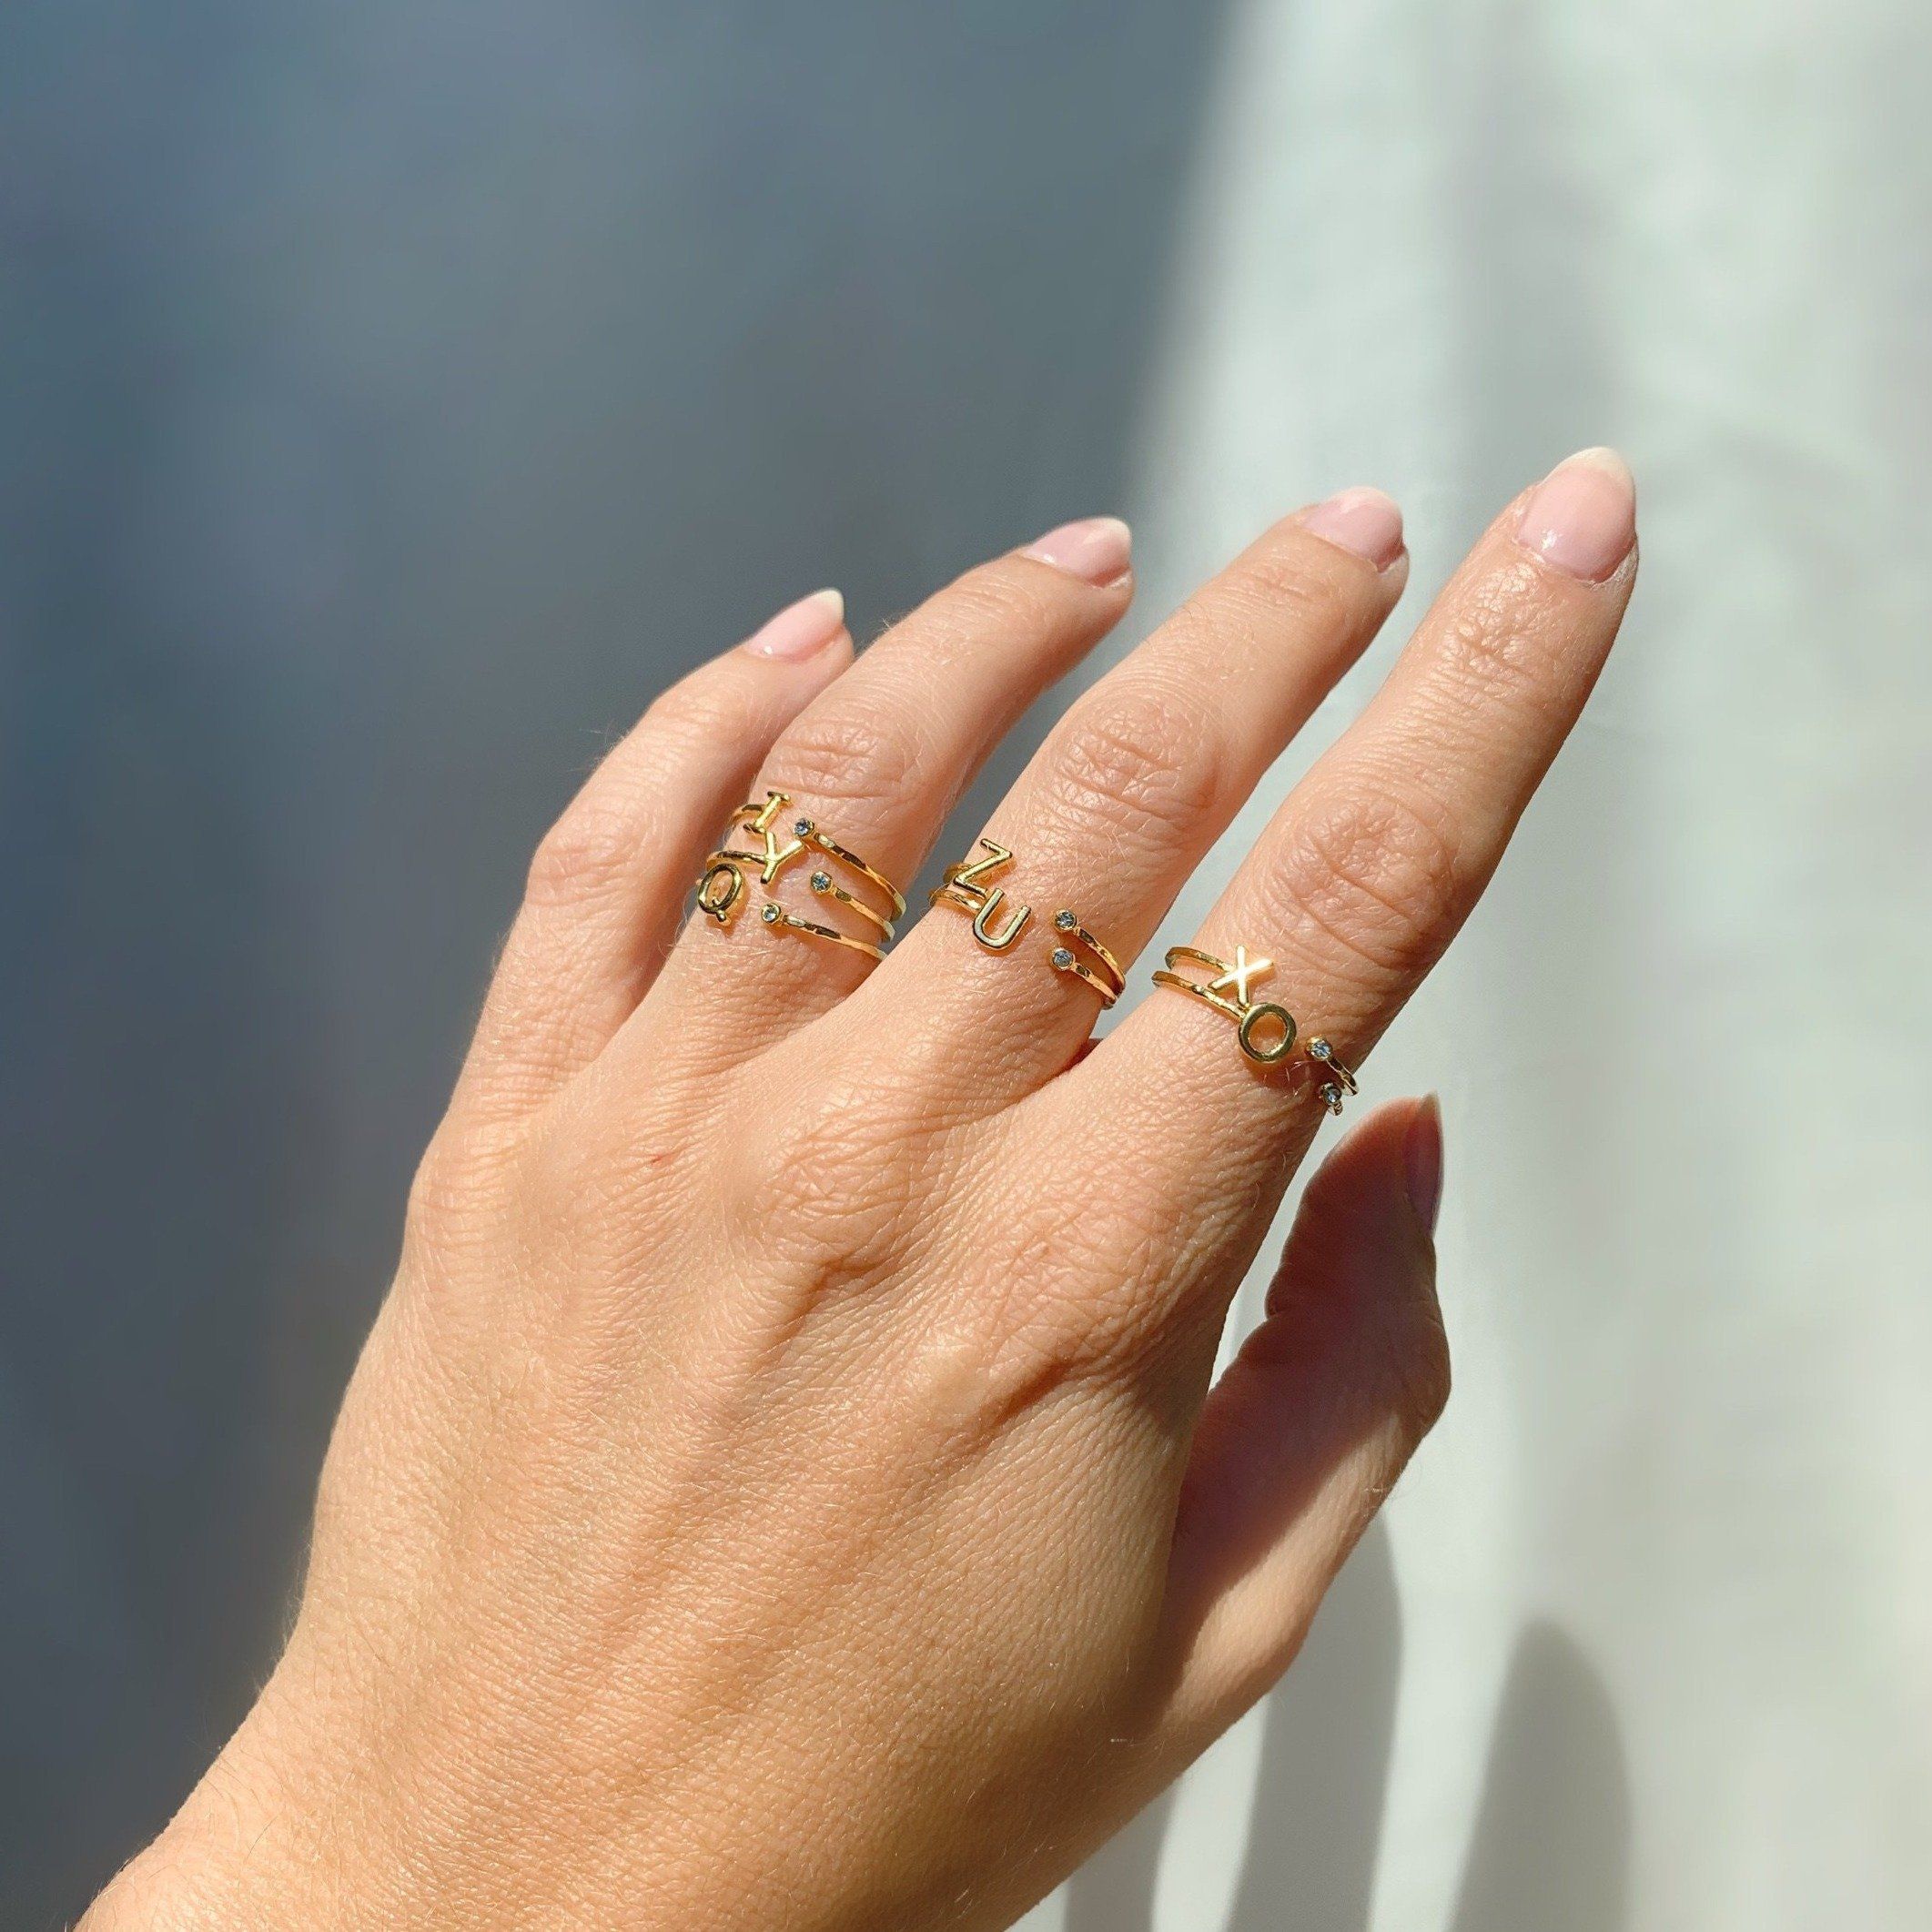 Dainty gold Initial Rings i, o, q, u, x, y, z sparkling in the sunlight as shown on a hand with a piece of white satin behind.